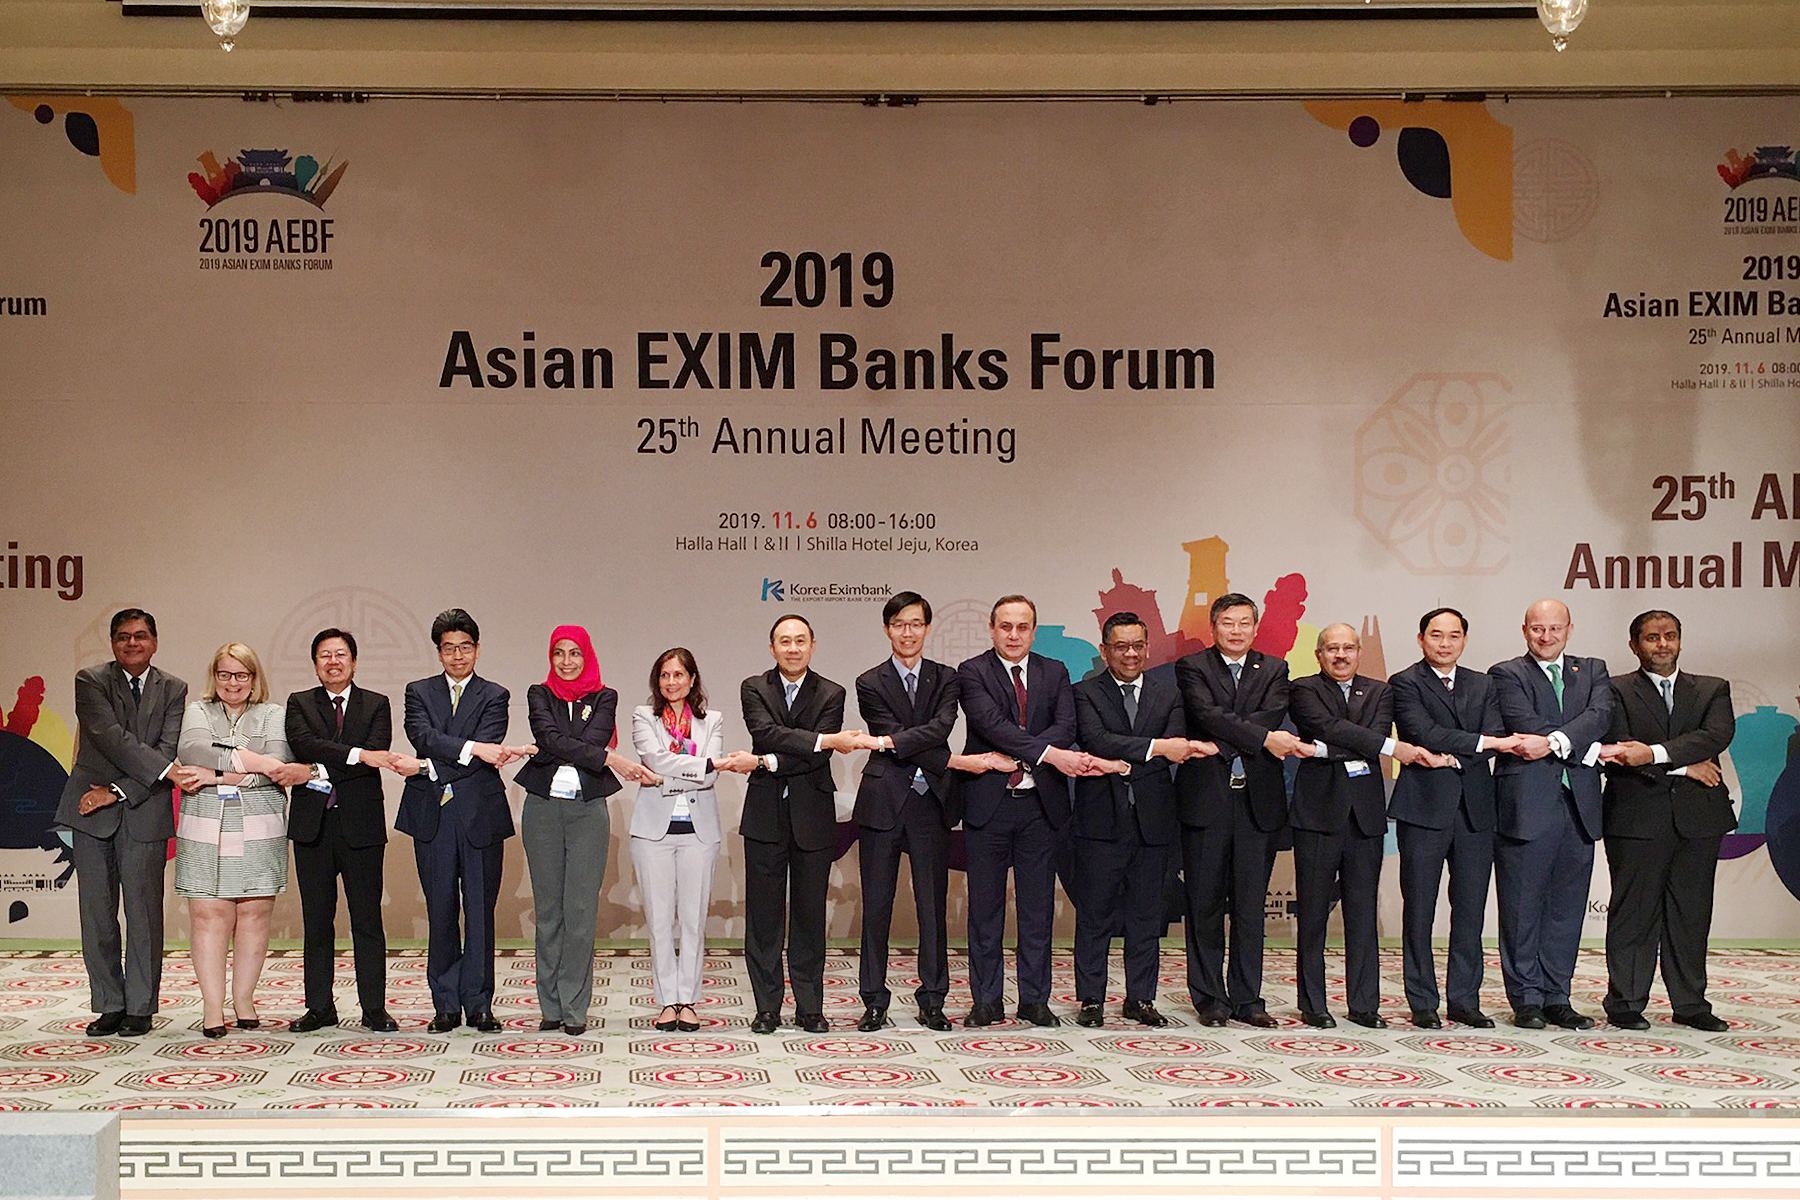 EXIM Thailand Joins the 25th Annual Meeting of Asian EXIM Banks Forum